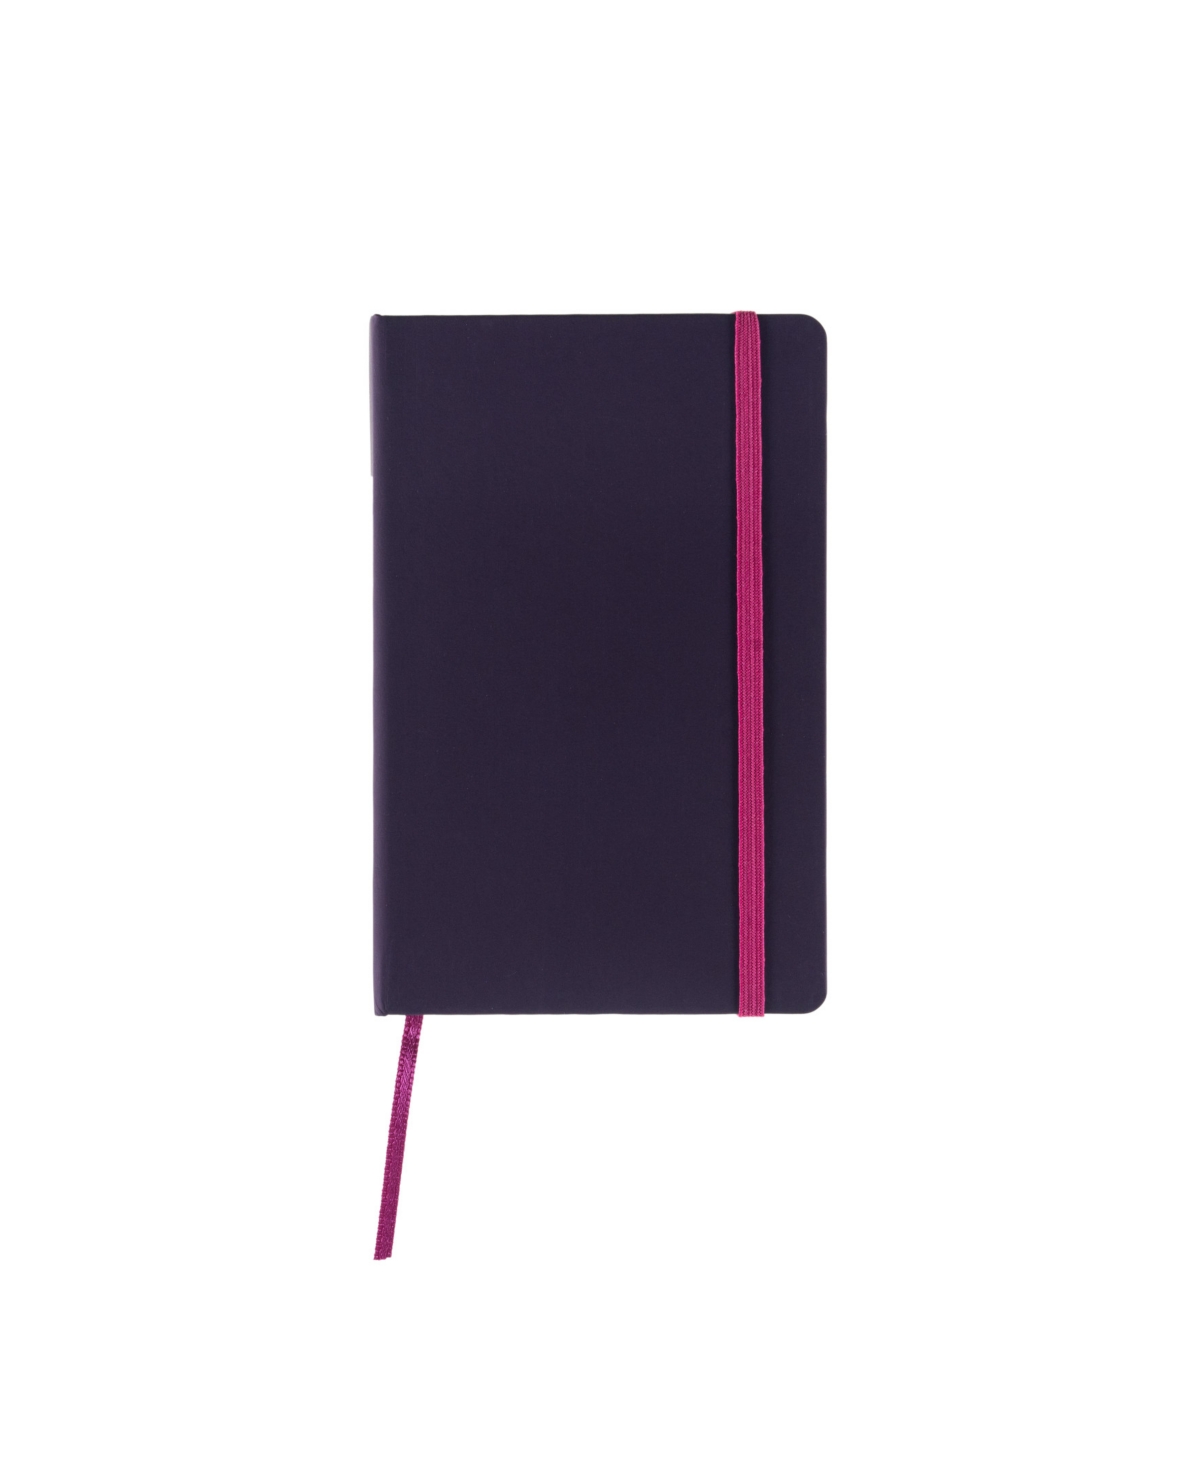 Ispira Hard Cover Lined Notebook, 3.5" x 5.5" - Purple